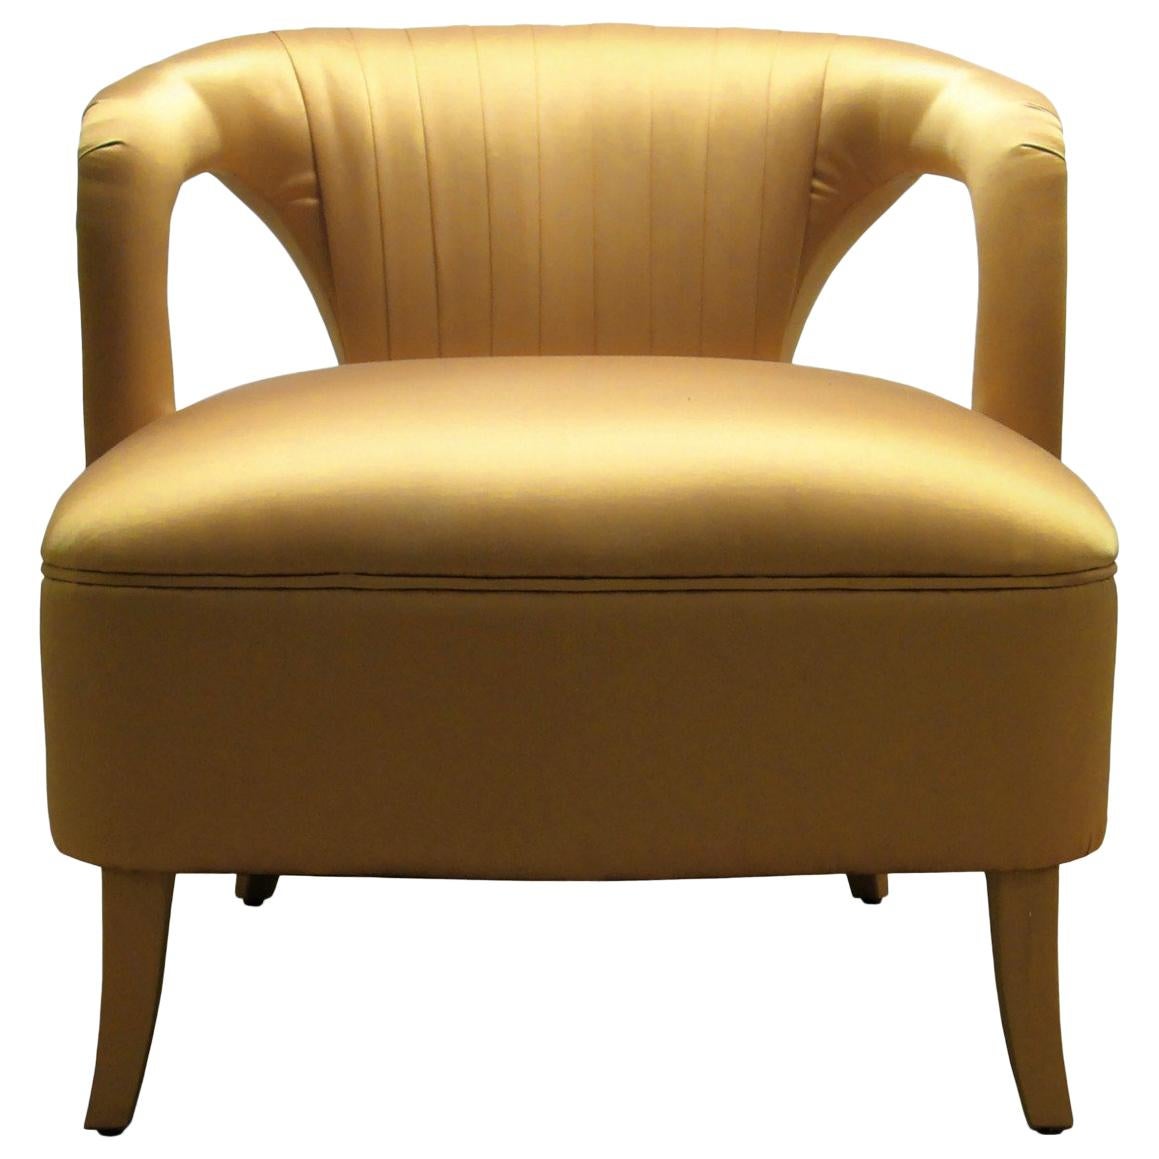 Karoo Armchair in Gold Satin With Fully Upholstered Legs by Brabbu For Sale